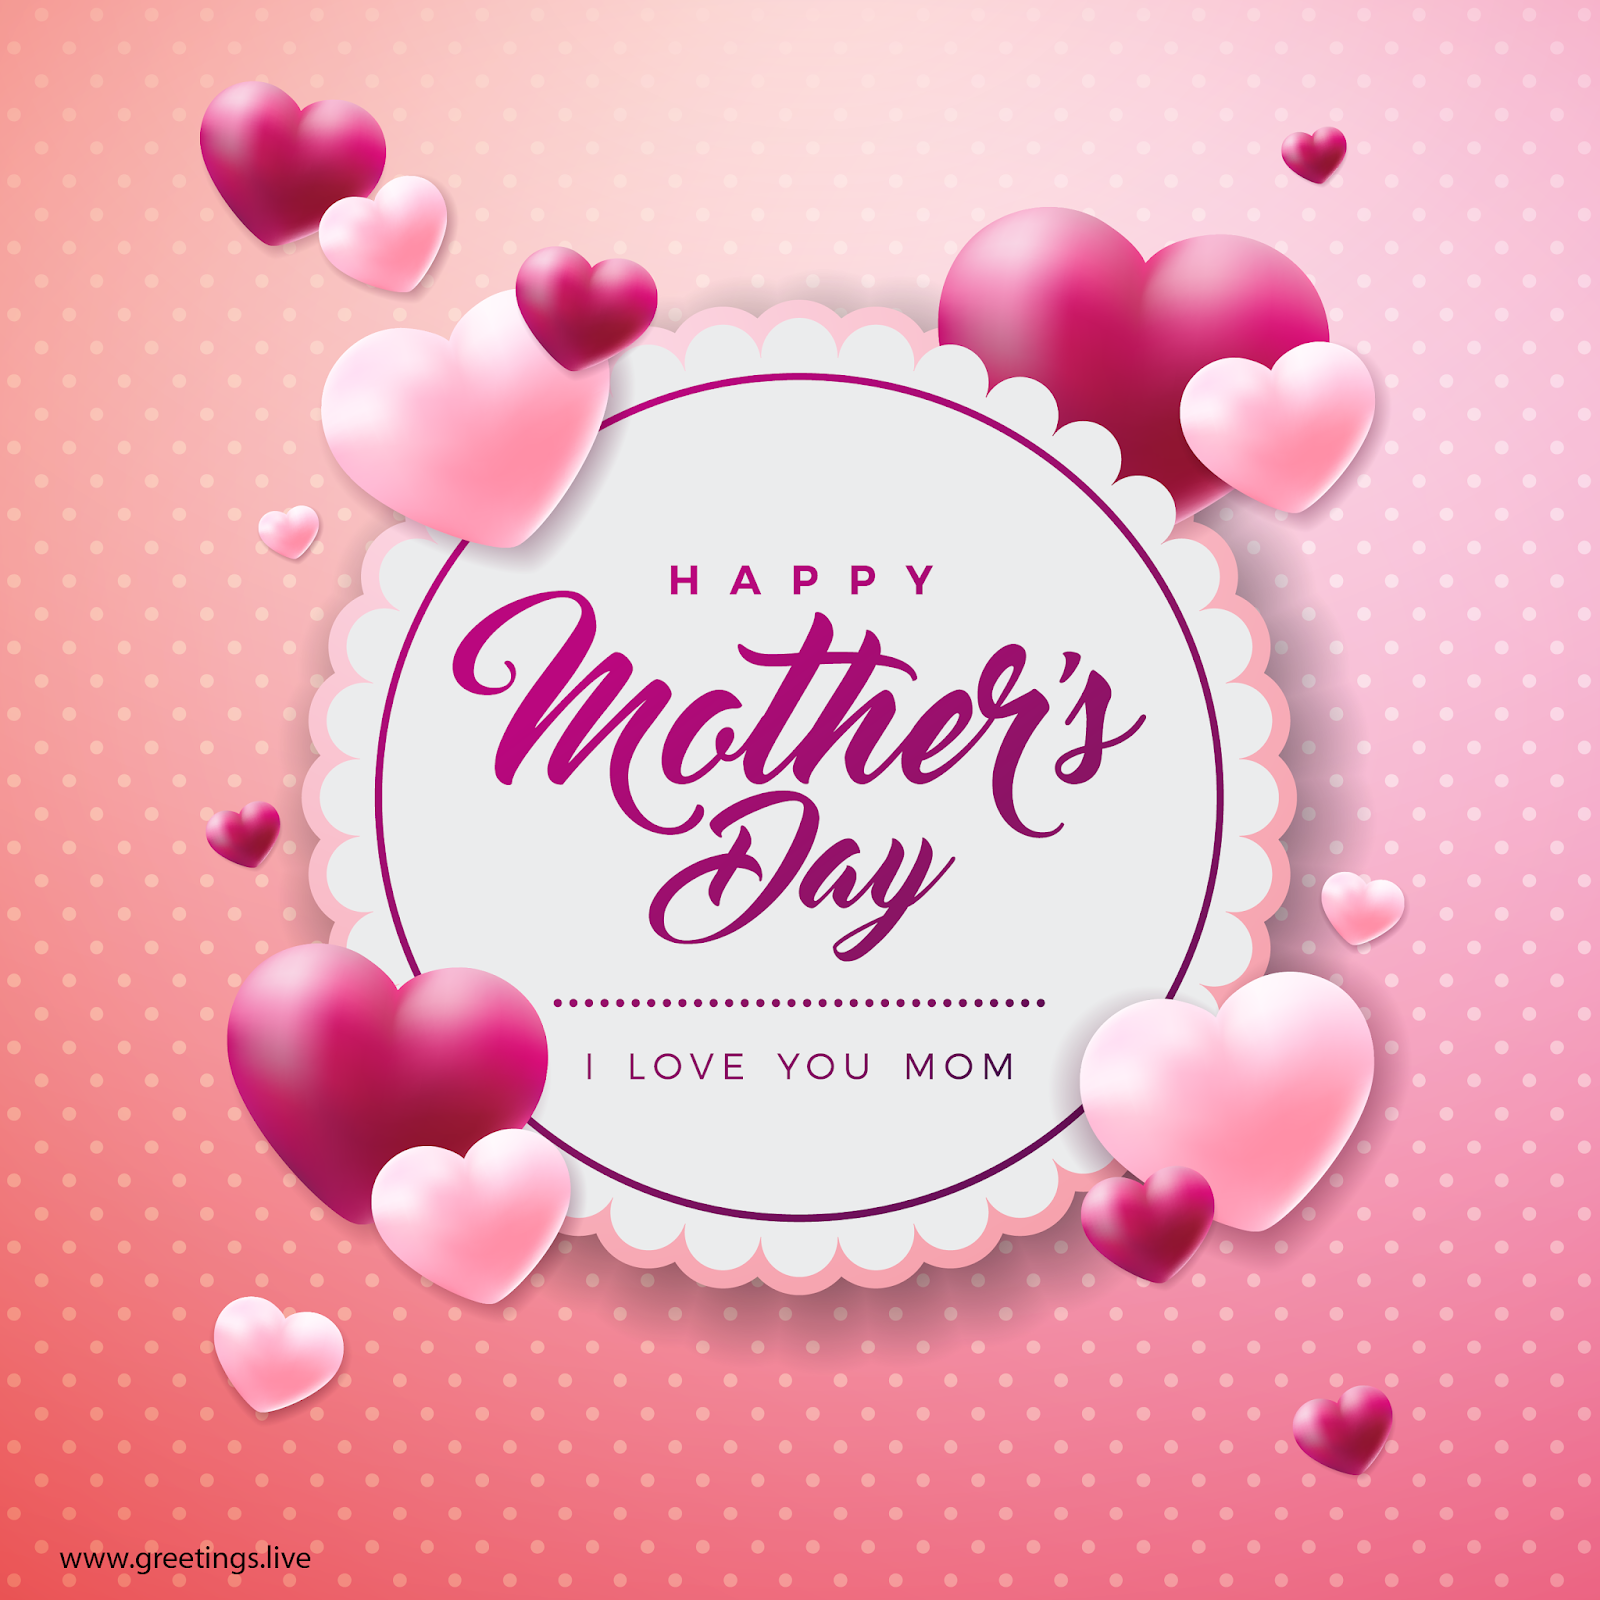 Greetings Live Free Daily Greetings Pictures Festival Gif Images Happy Mothers Day Wishes Ecards 19